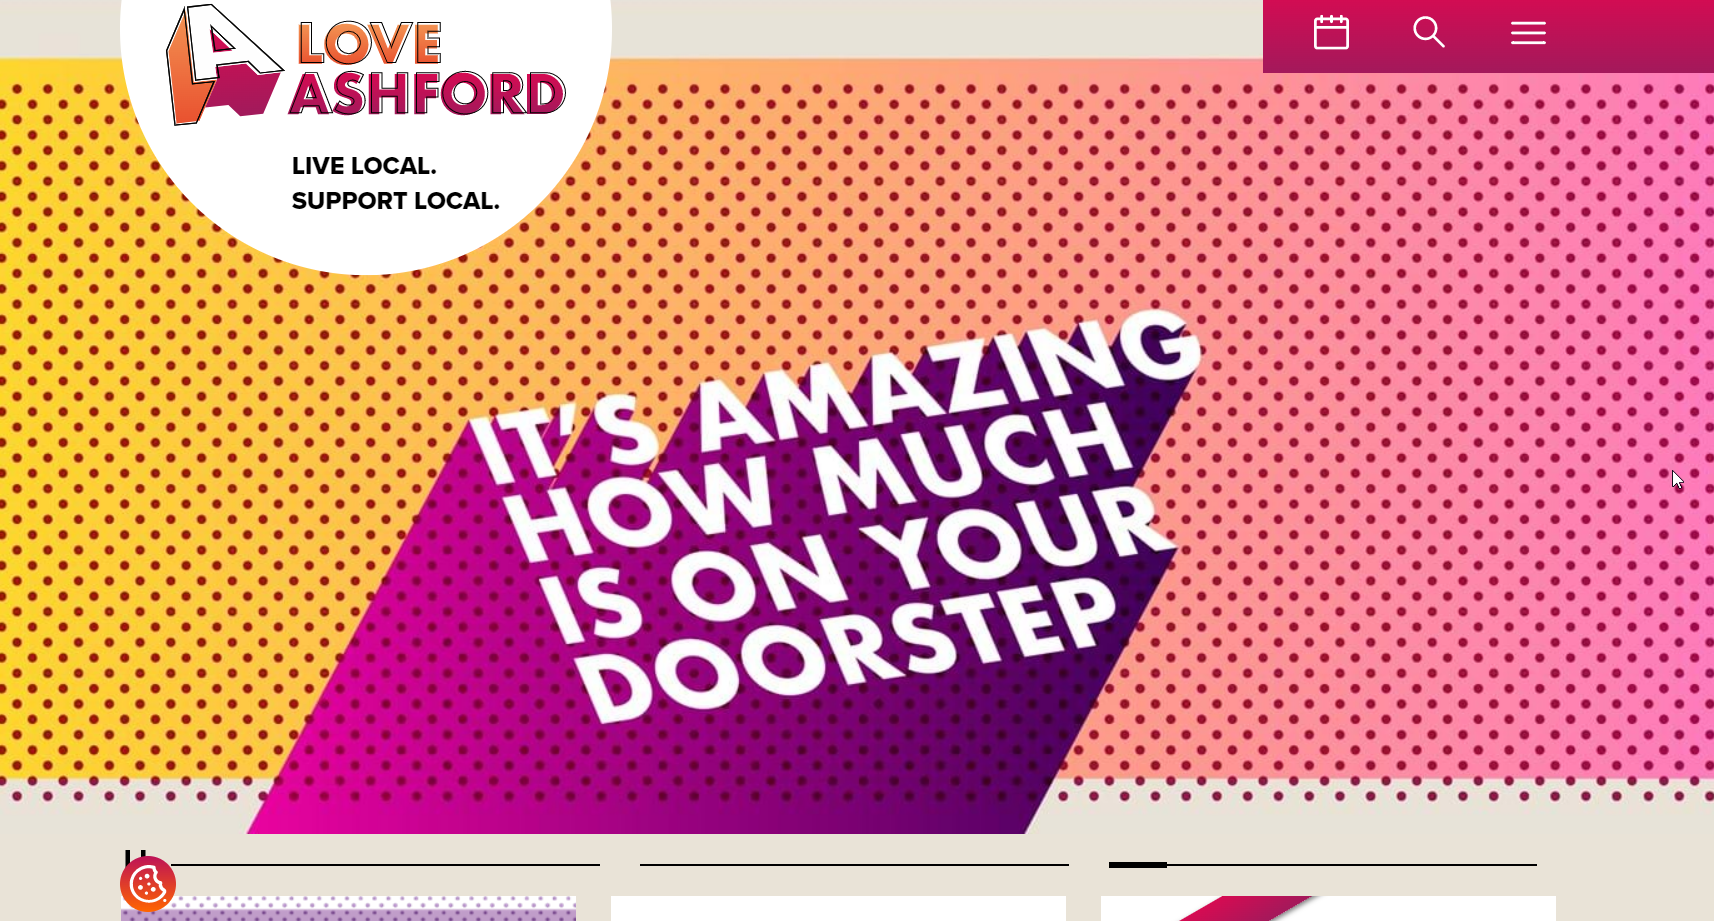 Preview of Loveashford website homepage with text that reads: LoveAshford, live local, support local. It's amazing how much is on your doorstep.